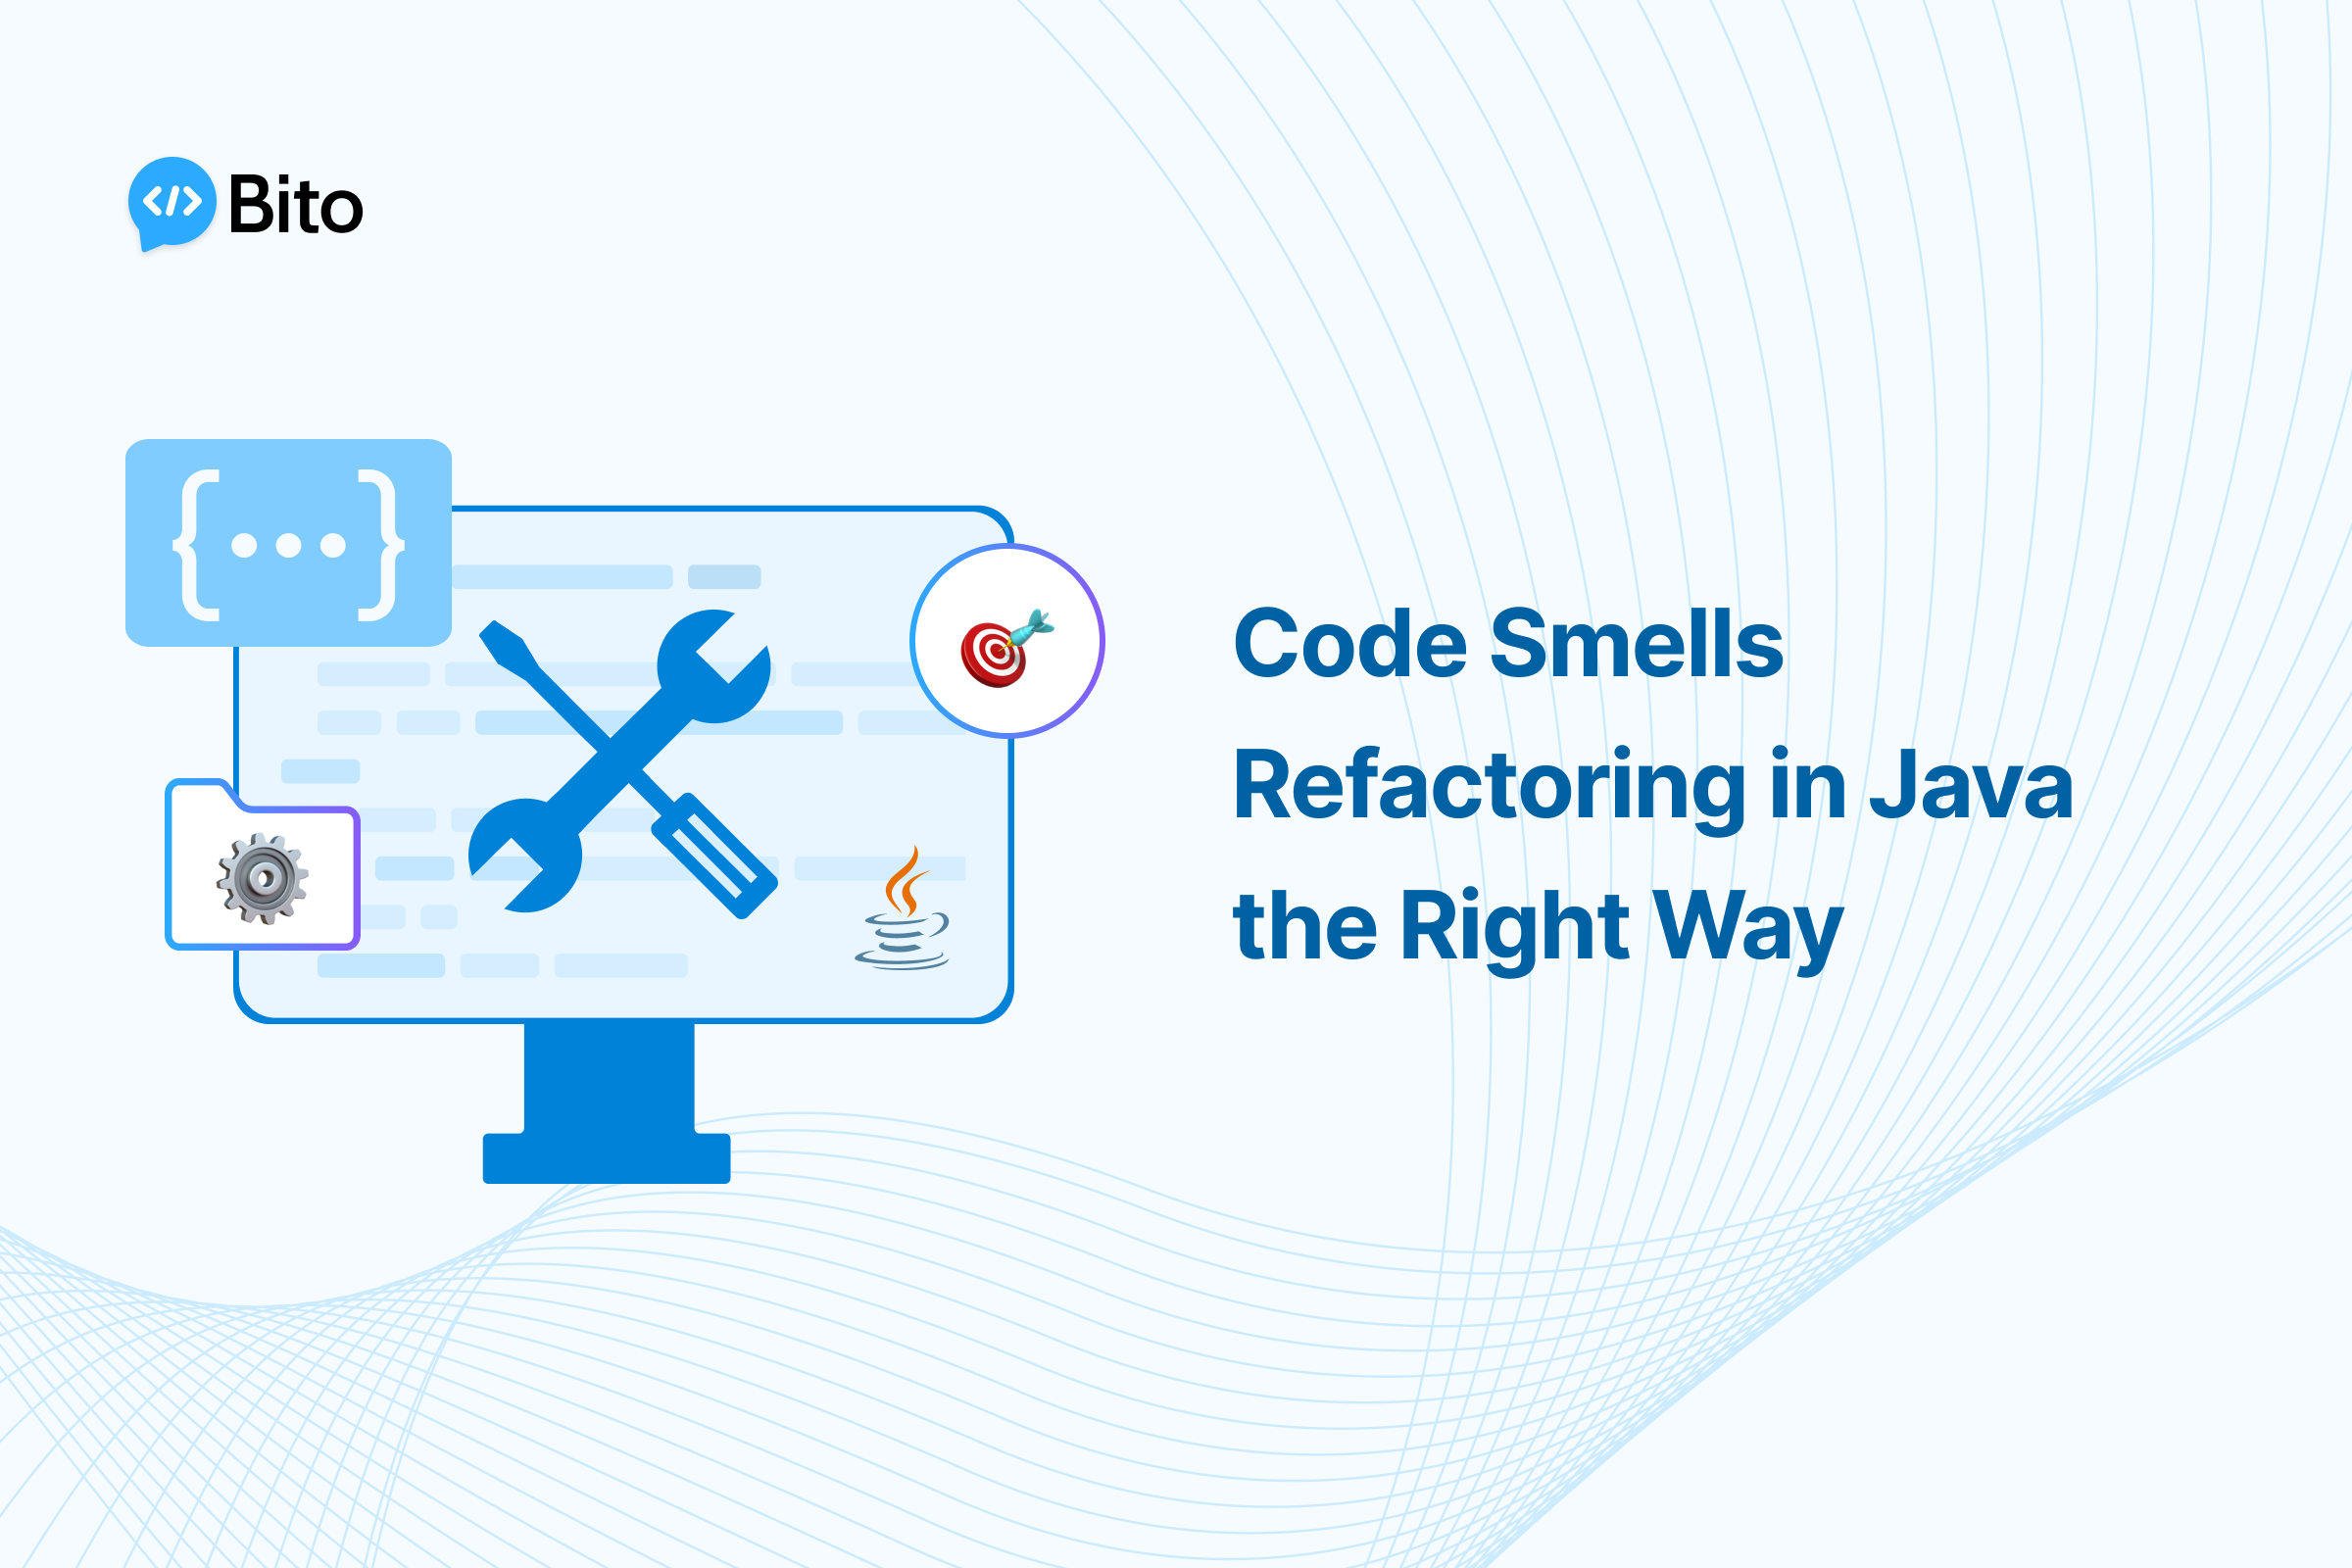 Code Smells Refactoring in Java the Right Way